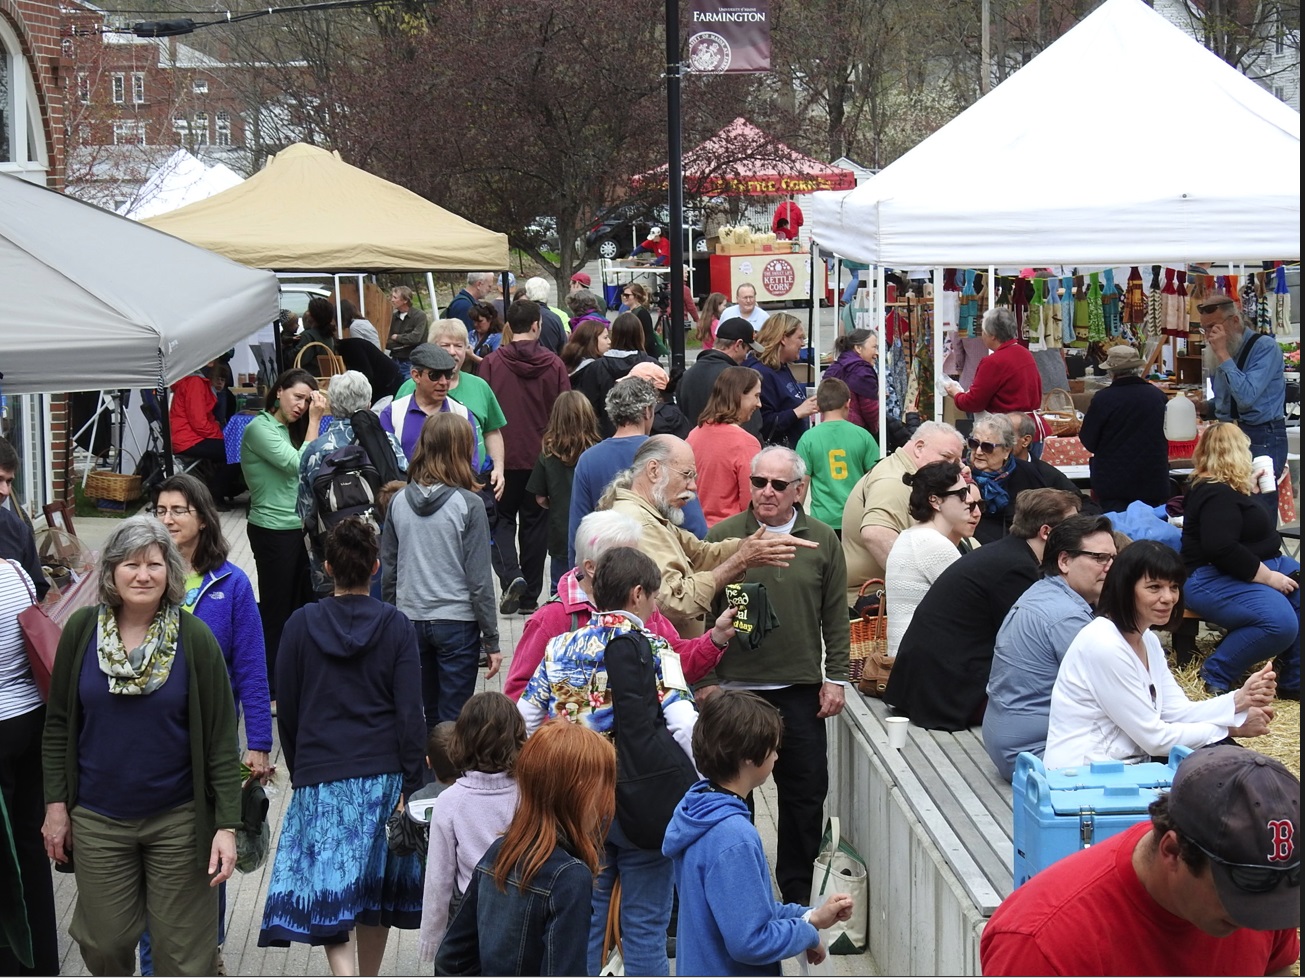 Maine Fiddlehead Festival celebrating the rural healthy lifestyle